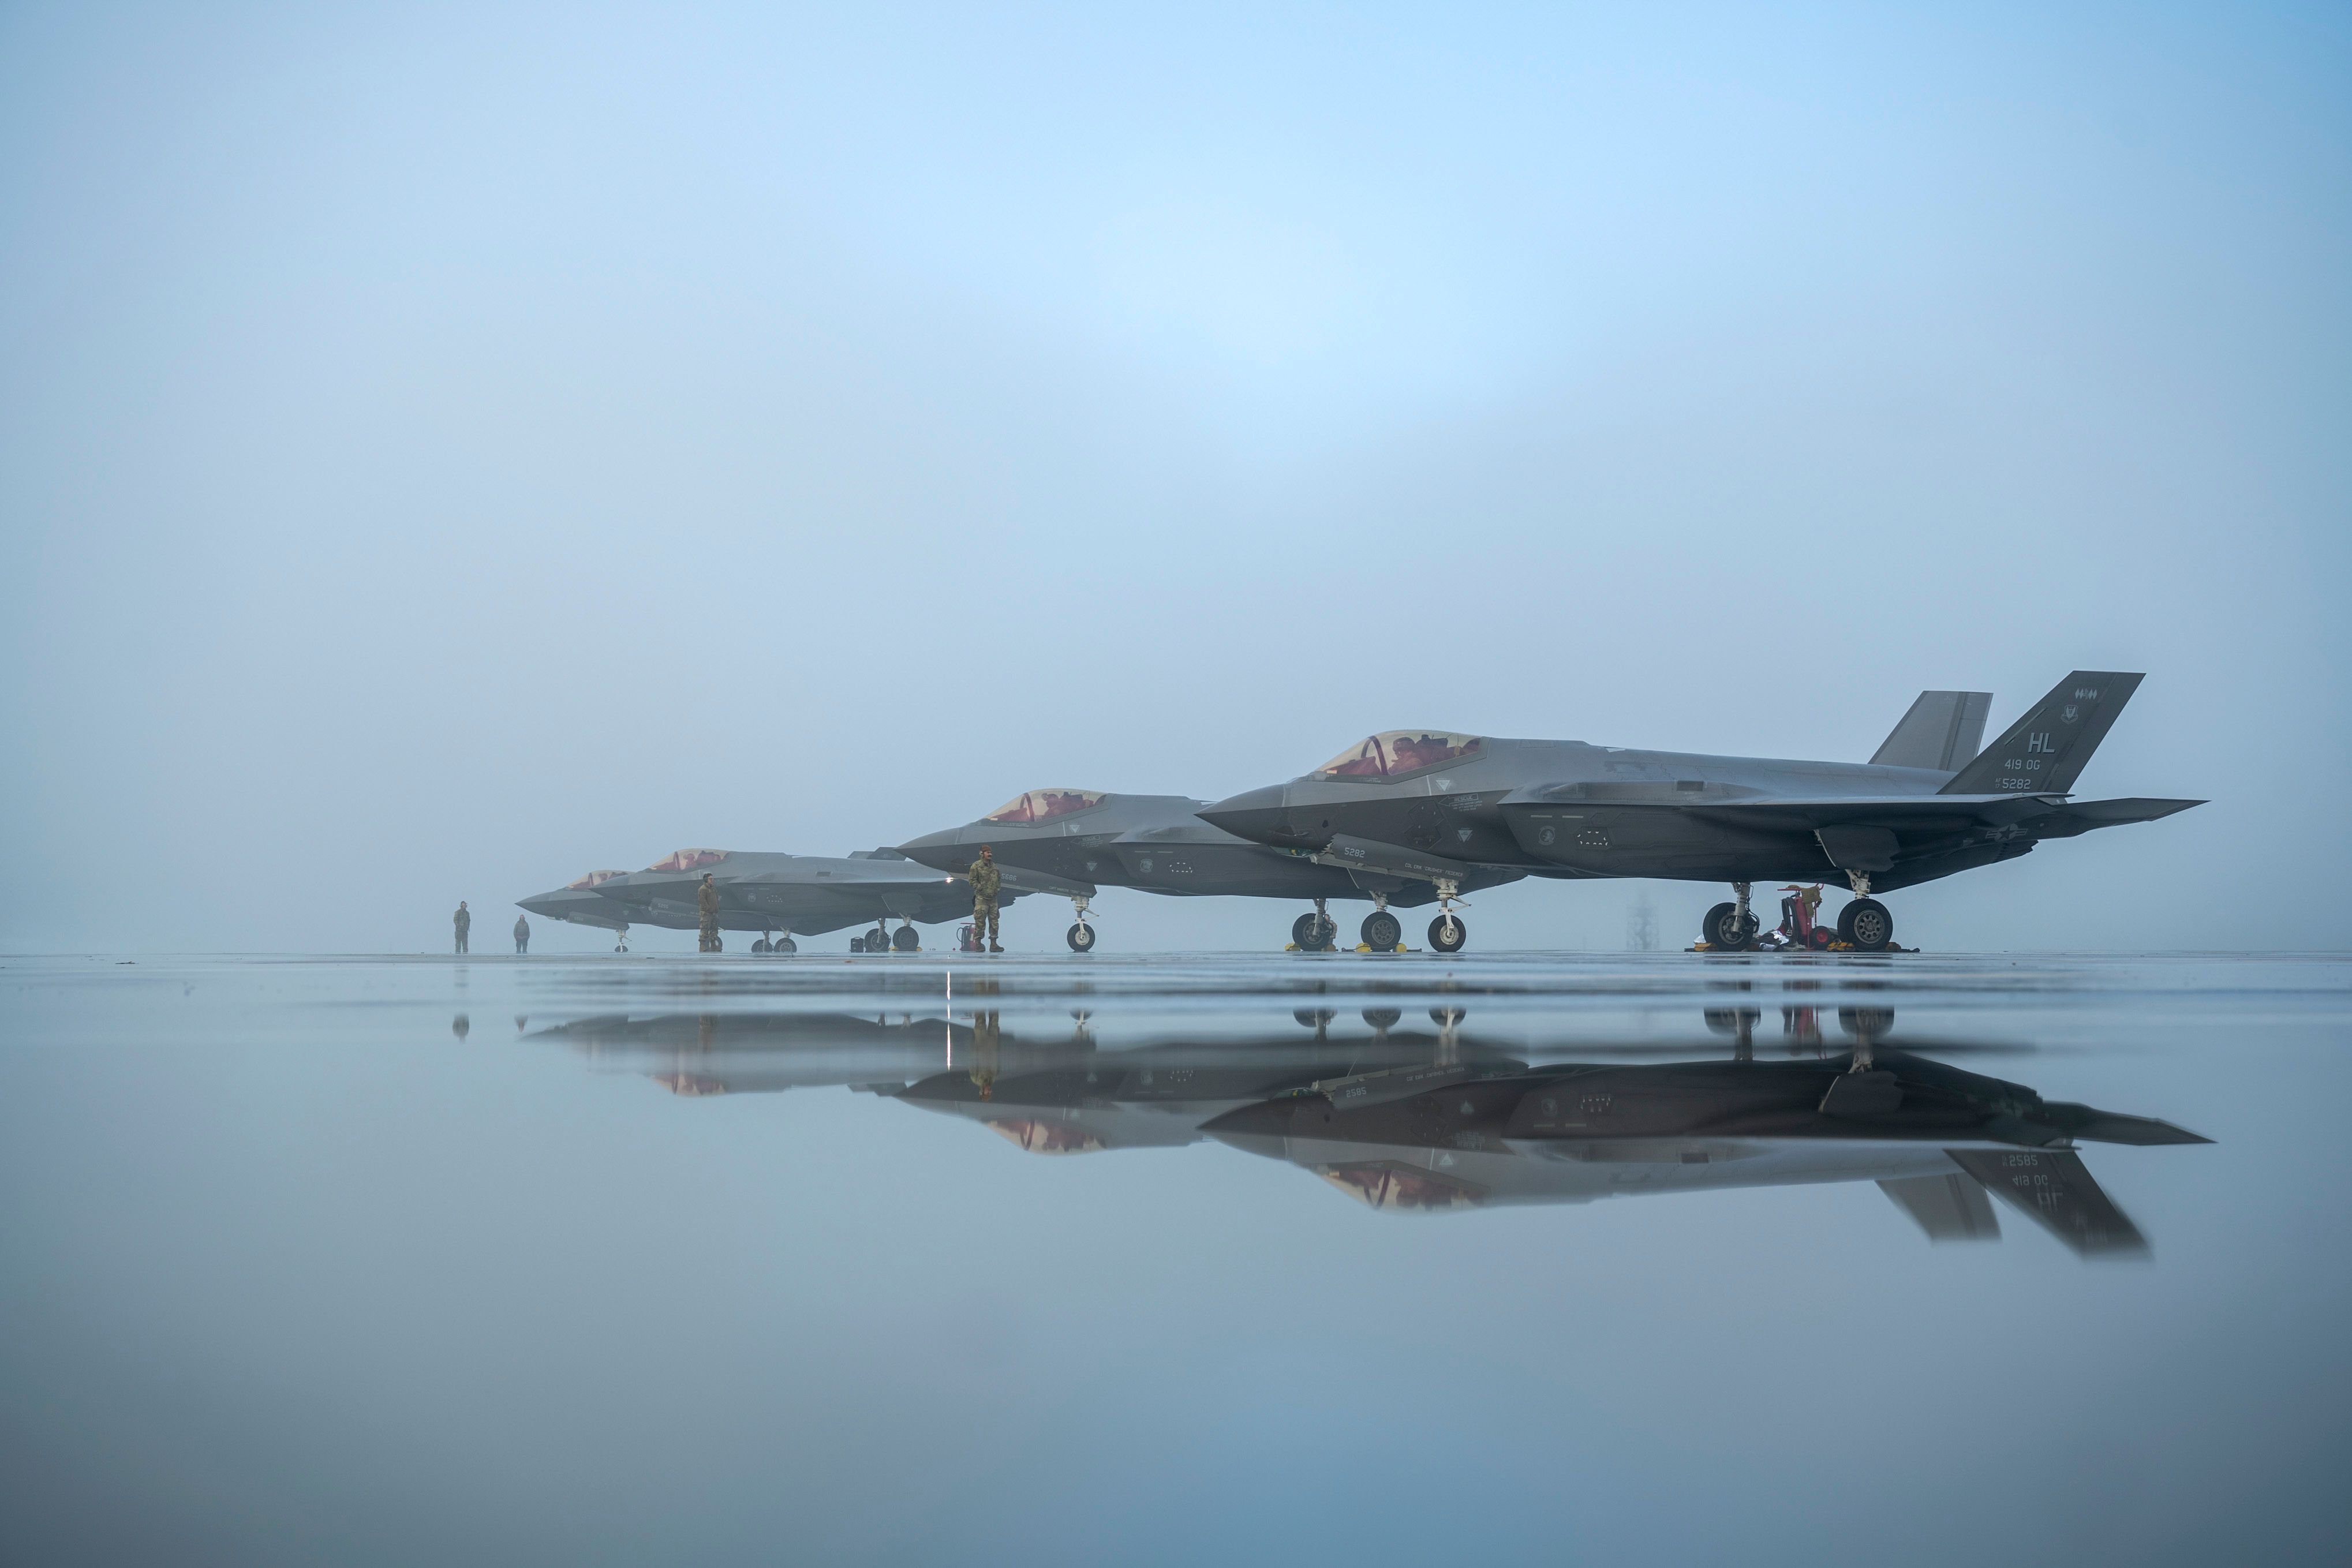 Three Lockheed Martin Lightning II parked on an airfield apron during foggy conditions.